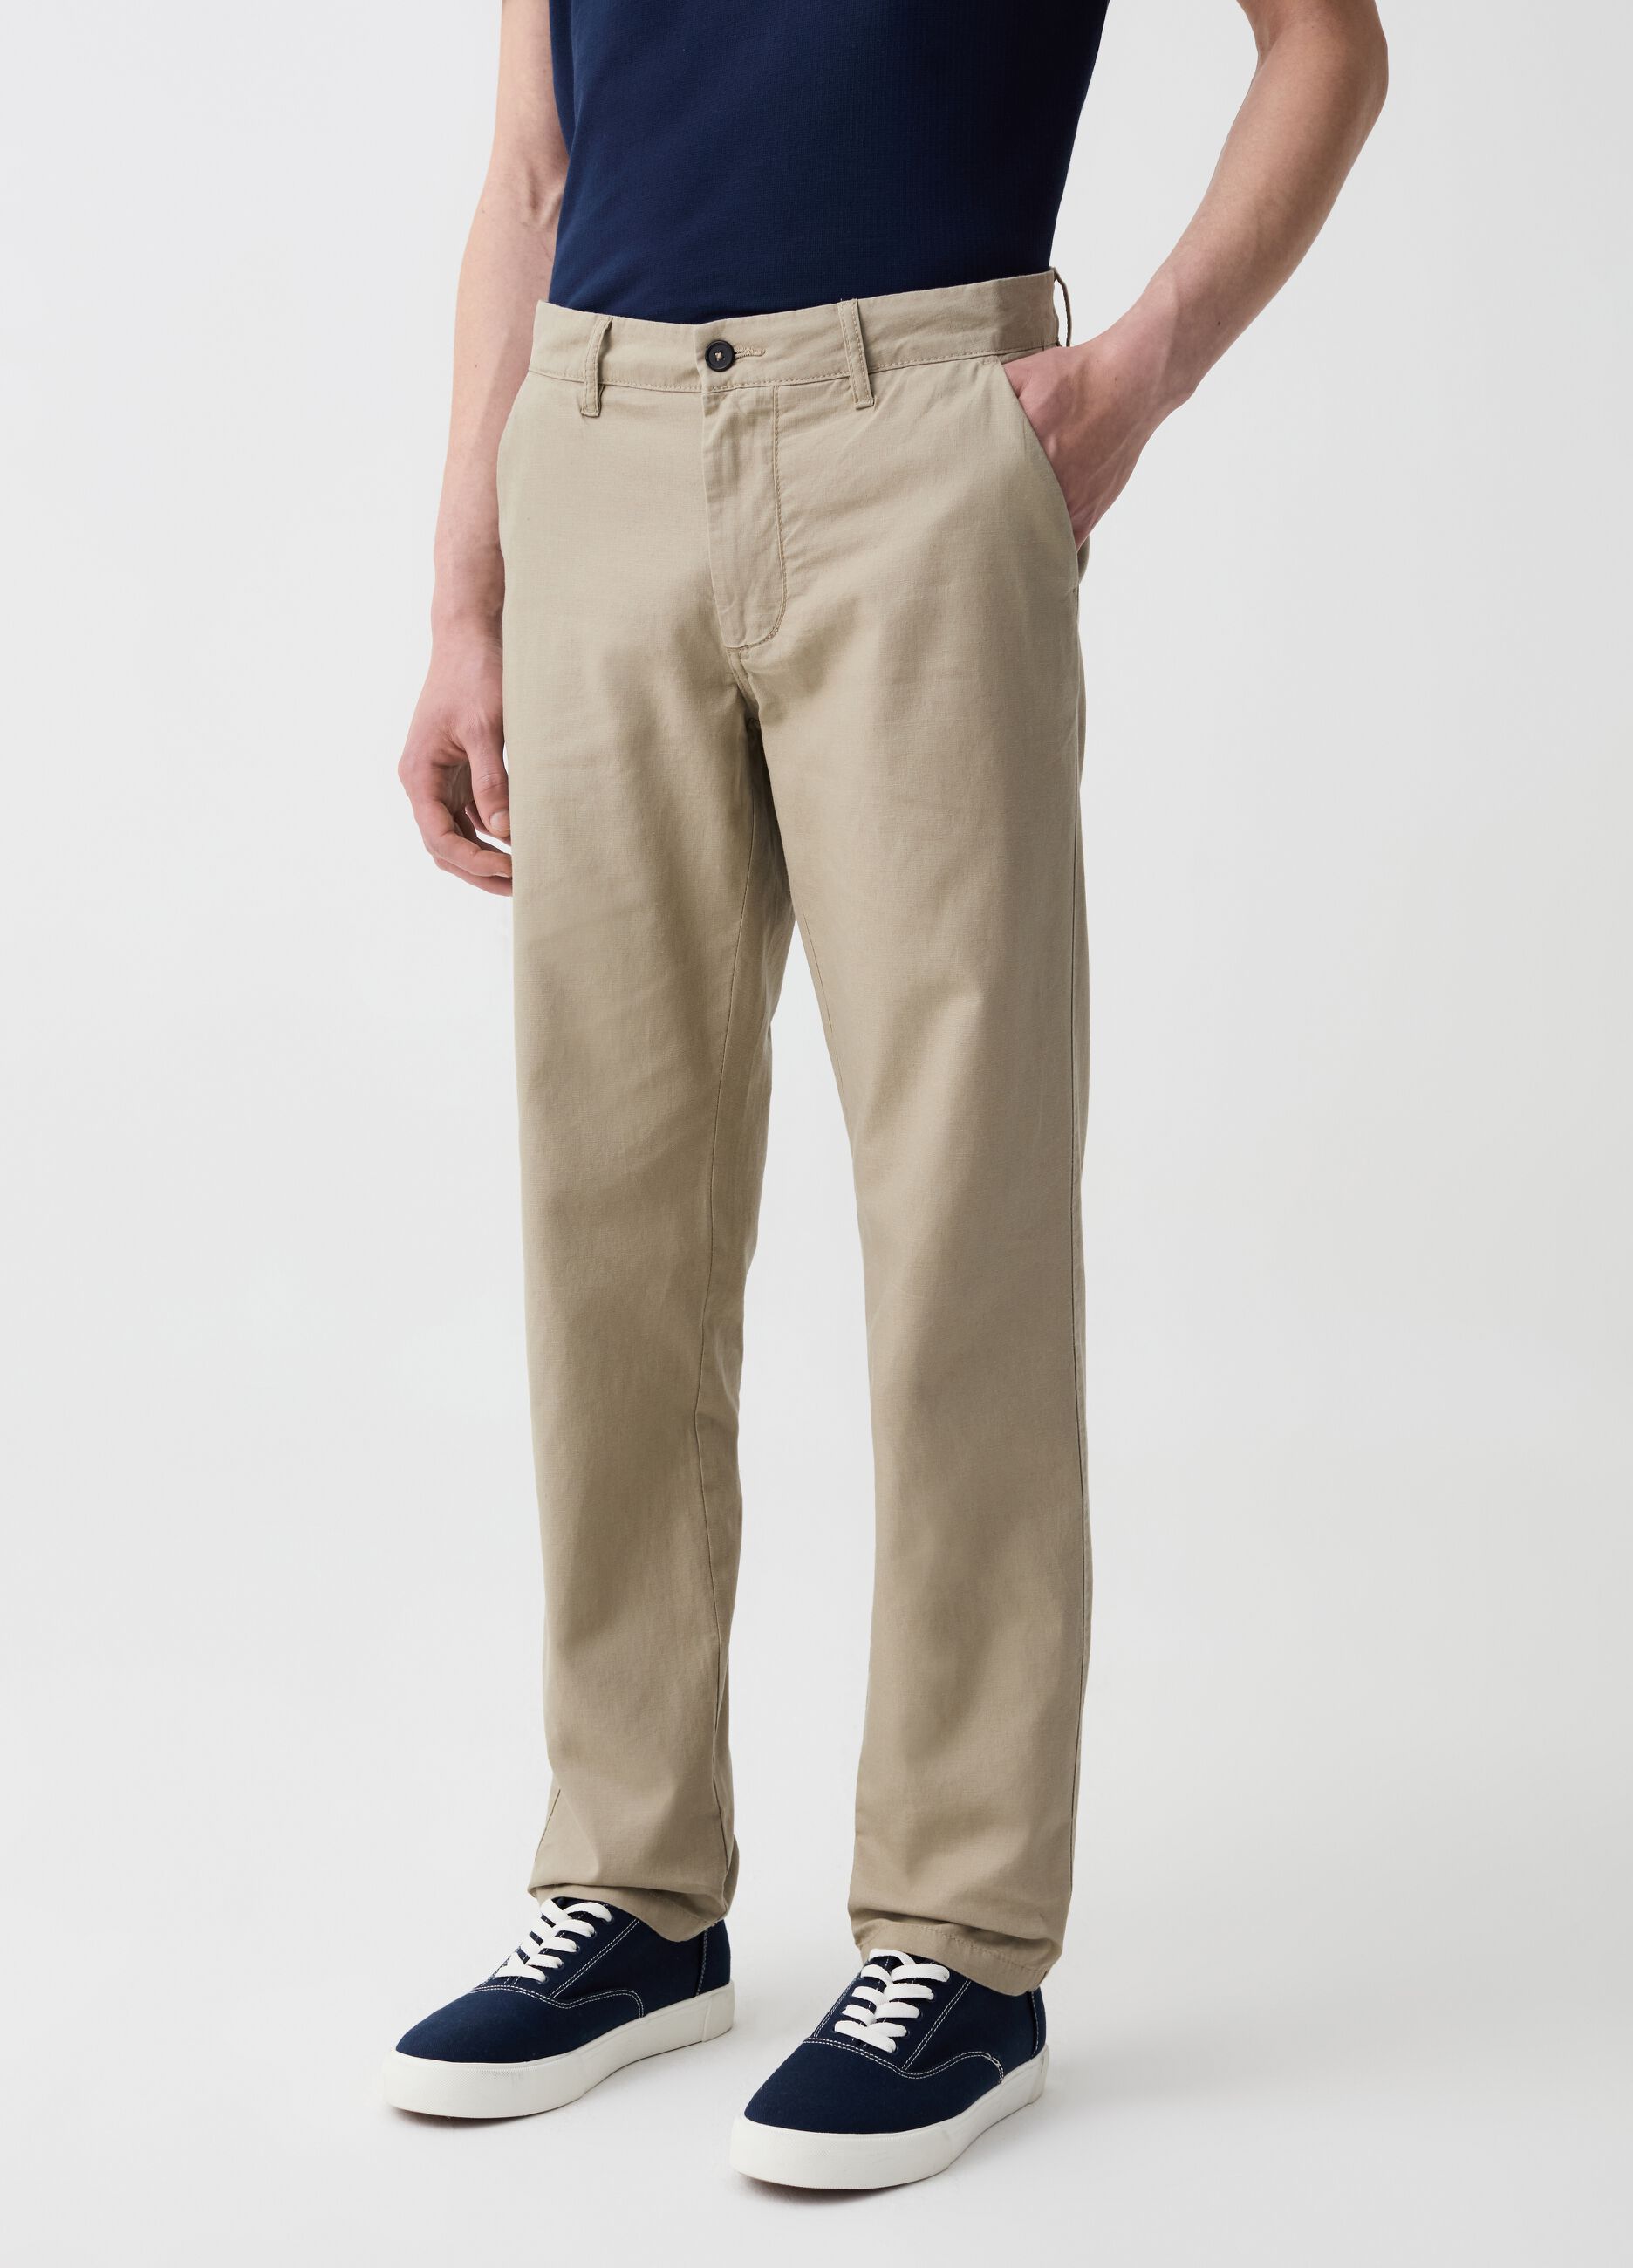 Chino trousers in linen and cotton